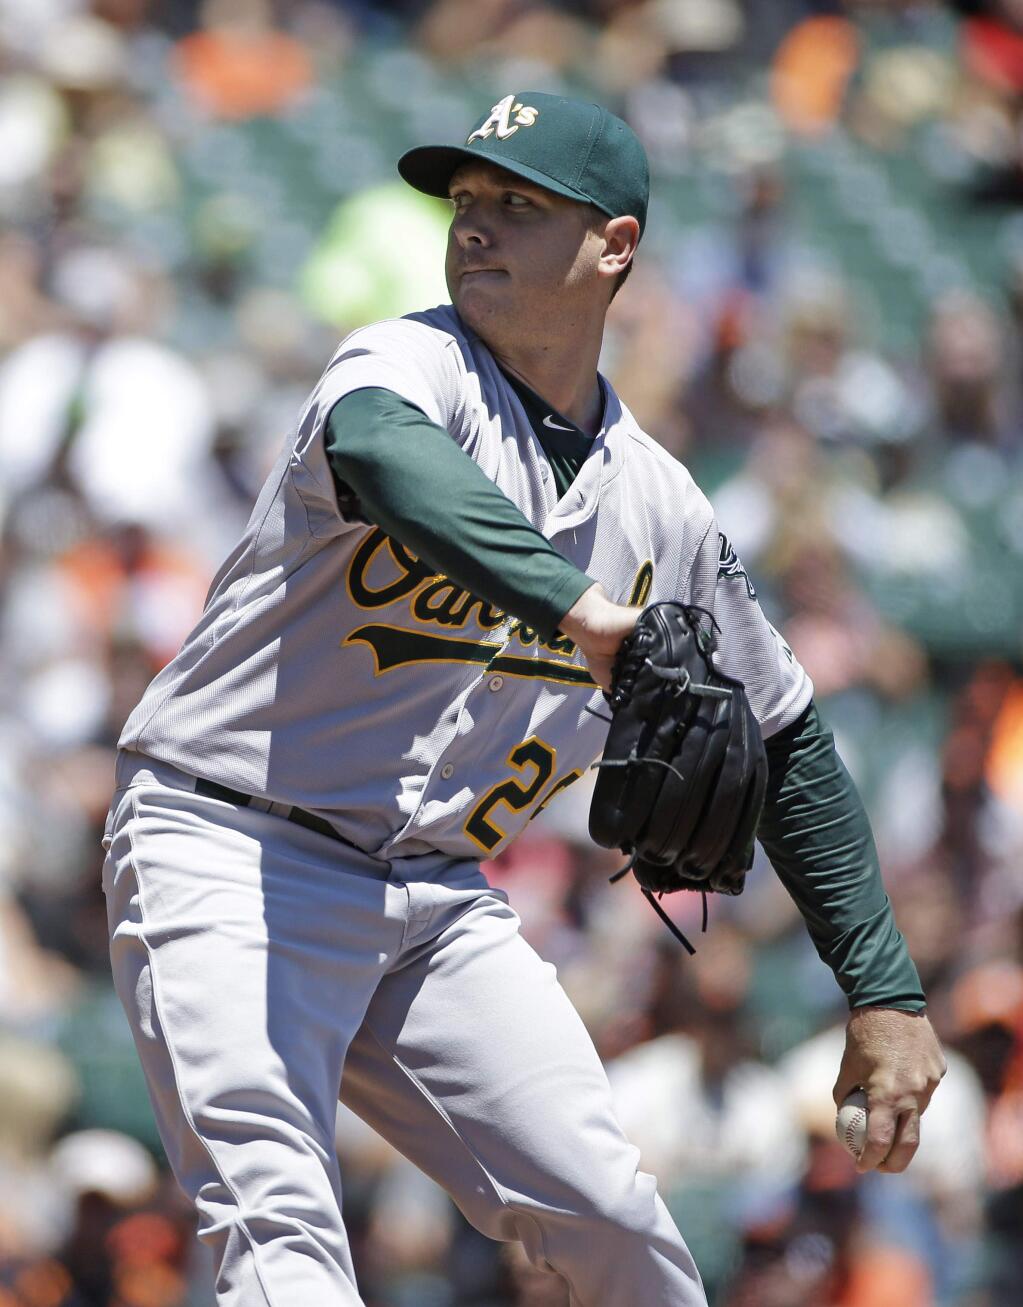 Oakland Athletics starting pitcher Scott Kazmir throws against the San Francisco Giants in the first inning of their interleague baseball game Thursday, July 10, 2014, in San Francisco. (AP Photo/Eric Risberg)